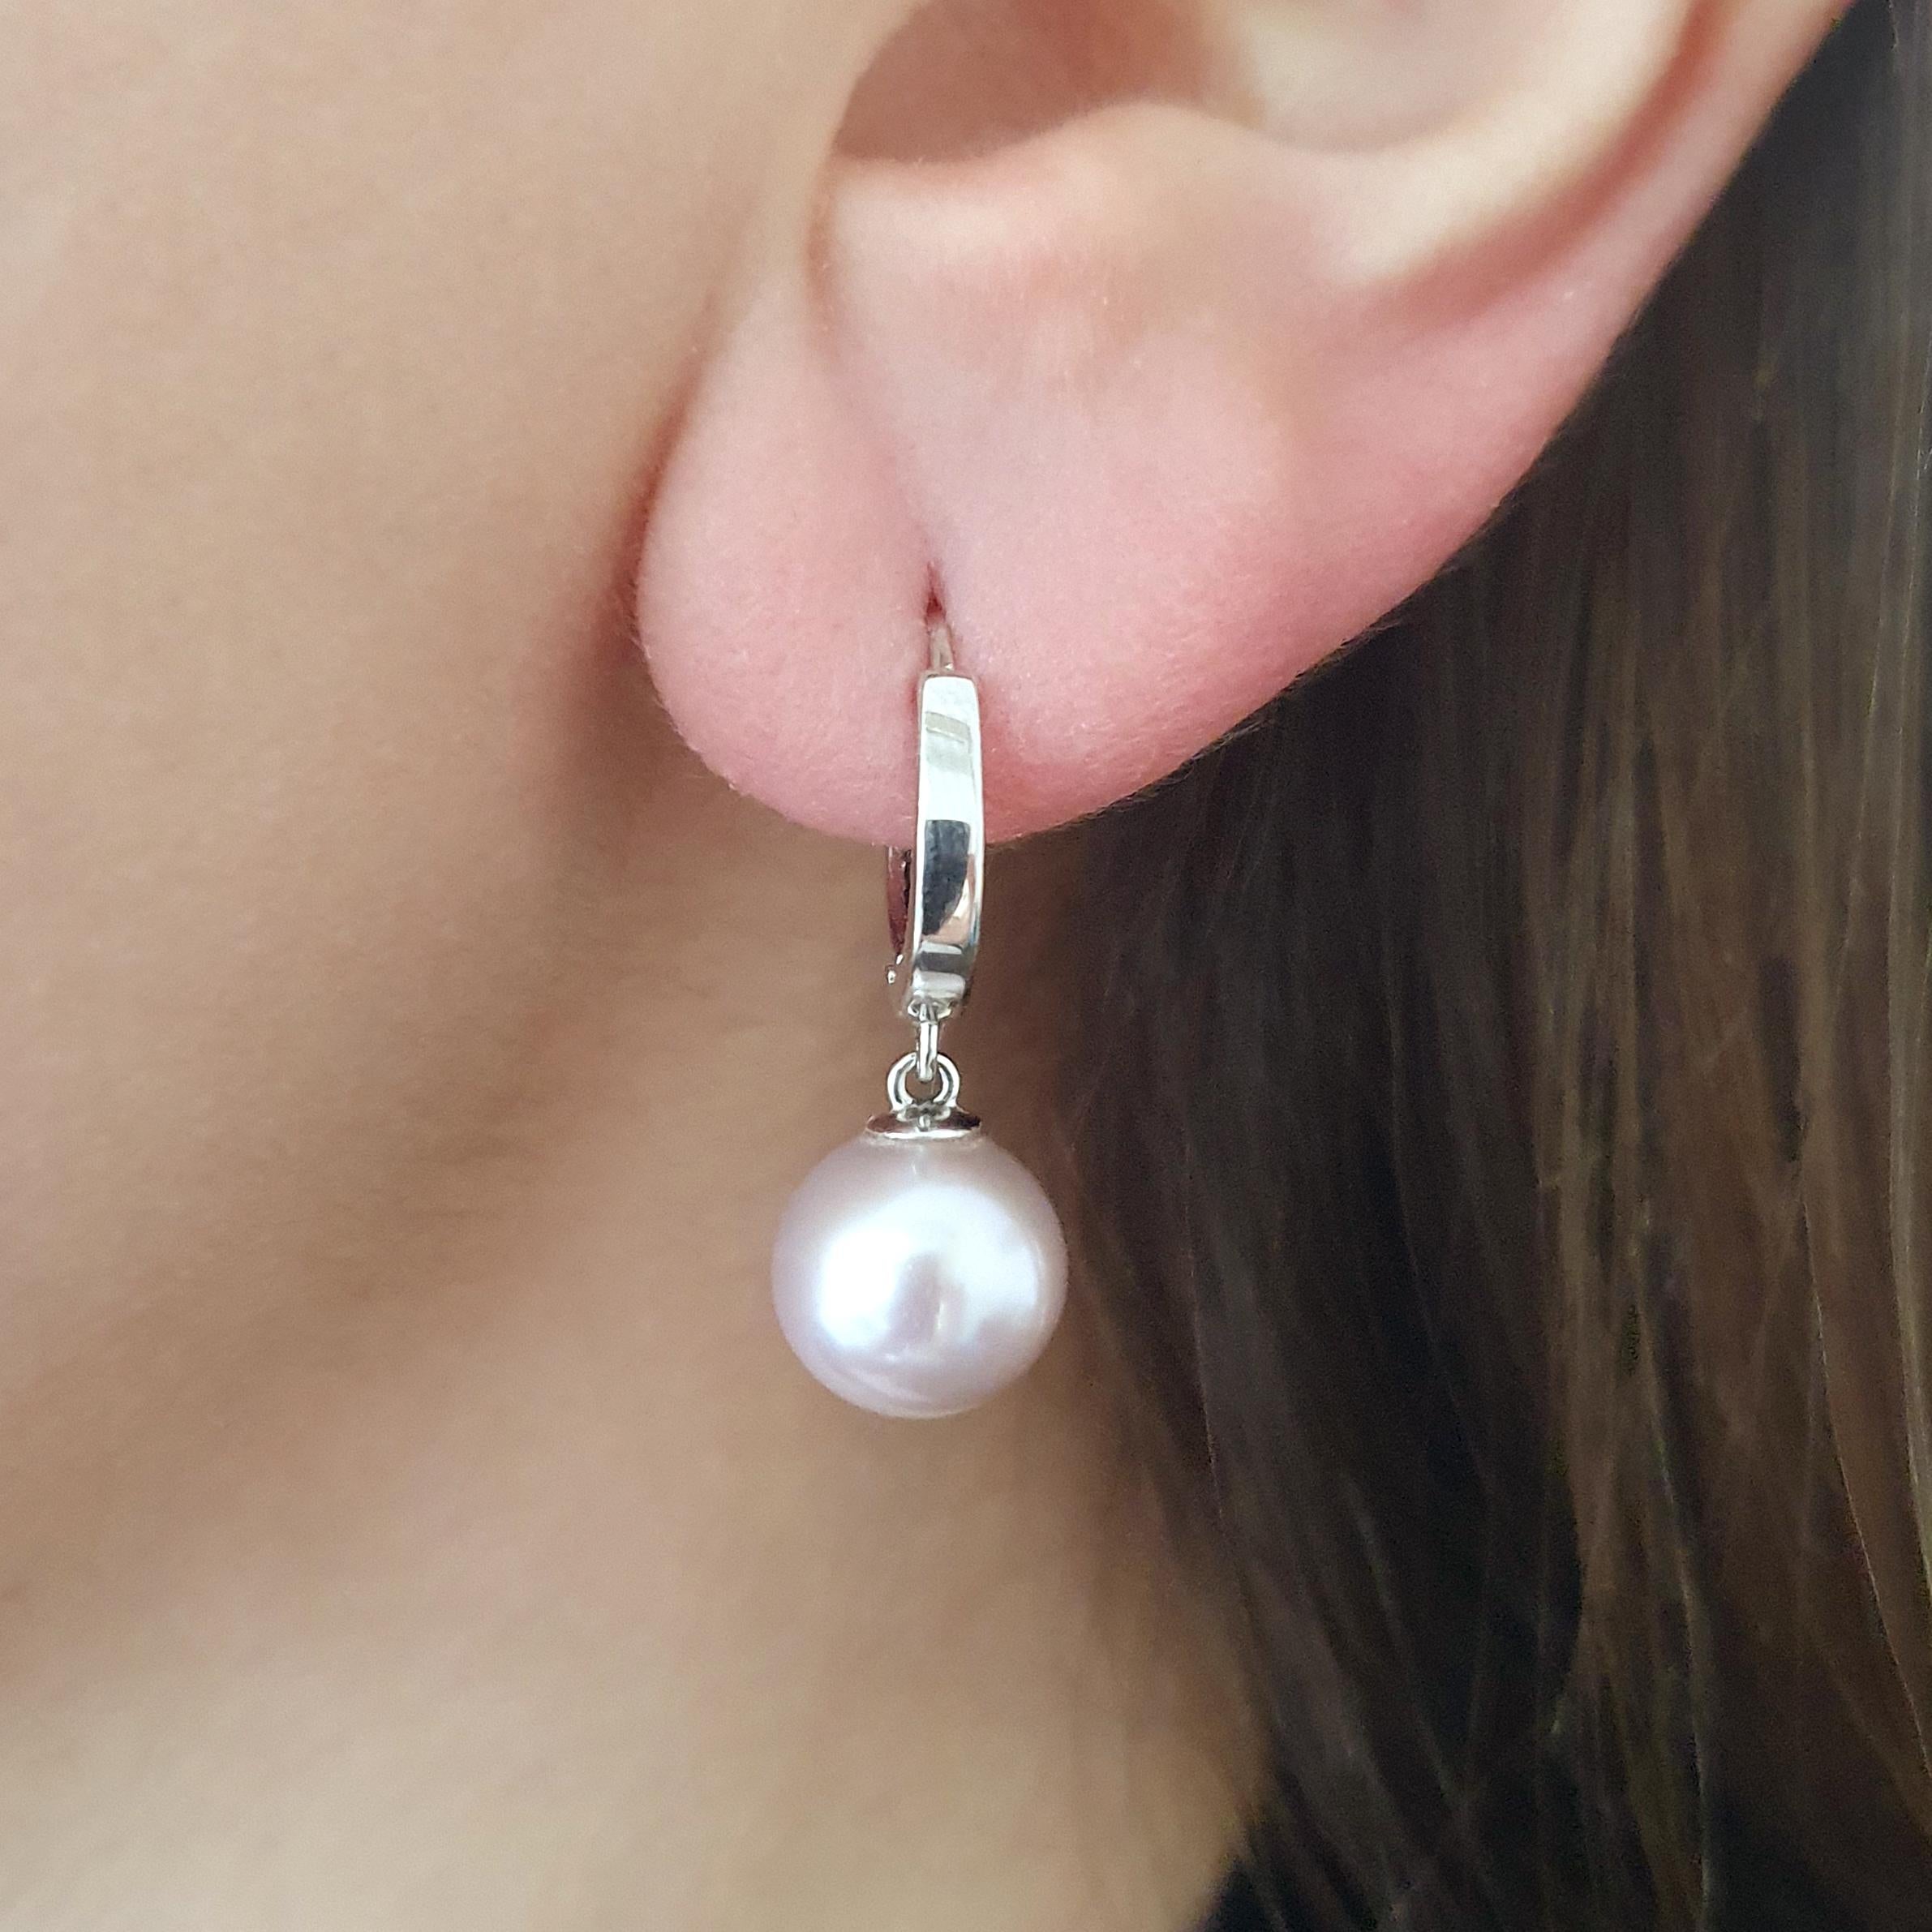 Cultured Pearl on White Gold 18k Ear Clips.

Total height: 0.98 inch (2.50 centimeters).
Total weight: 5.53 grams.
